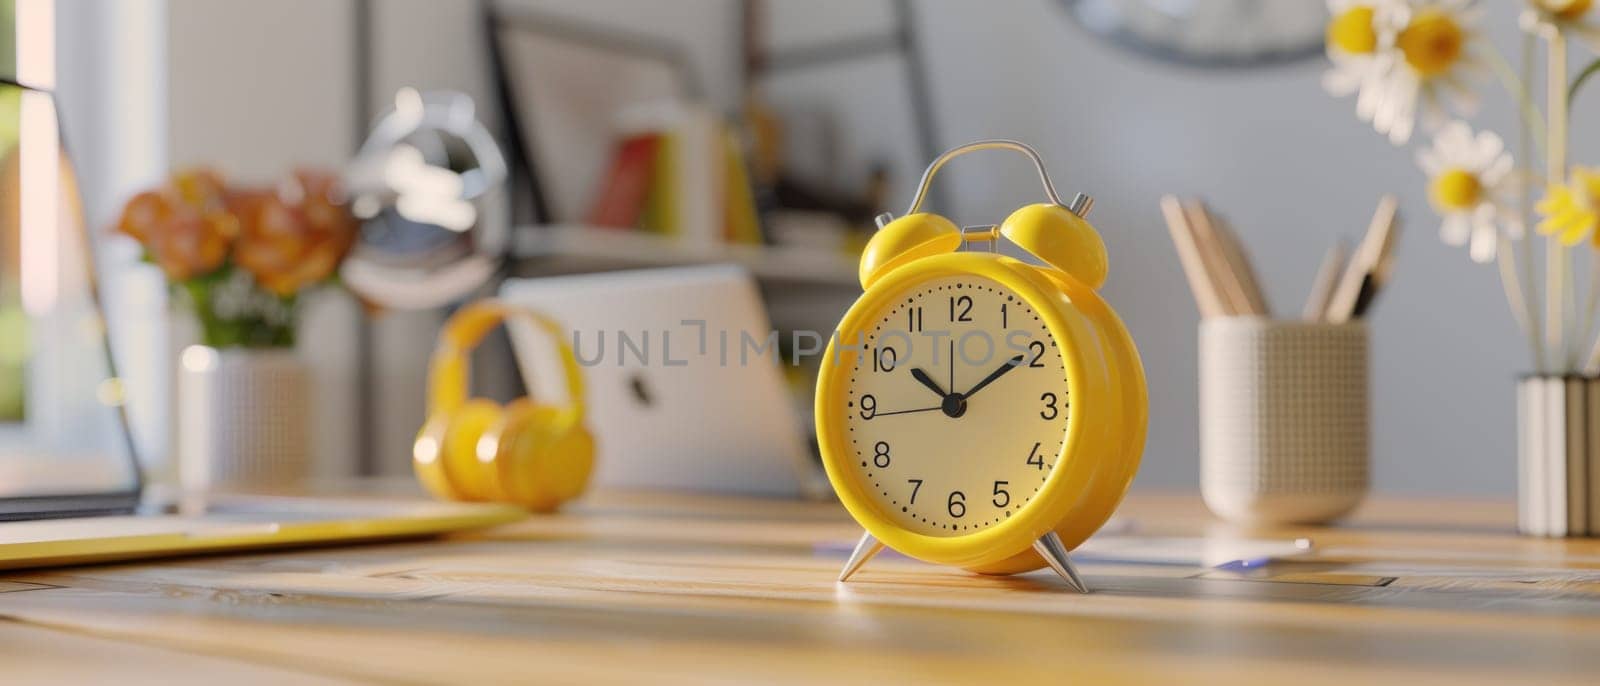 A yellow alarm clock sits on a wooden desk next to a laptop and a cup. The clock is set to the time of 10:30